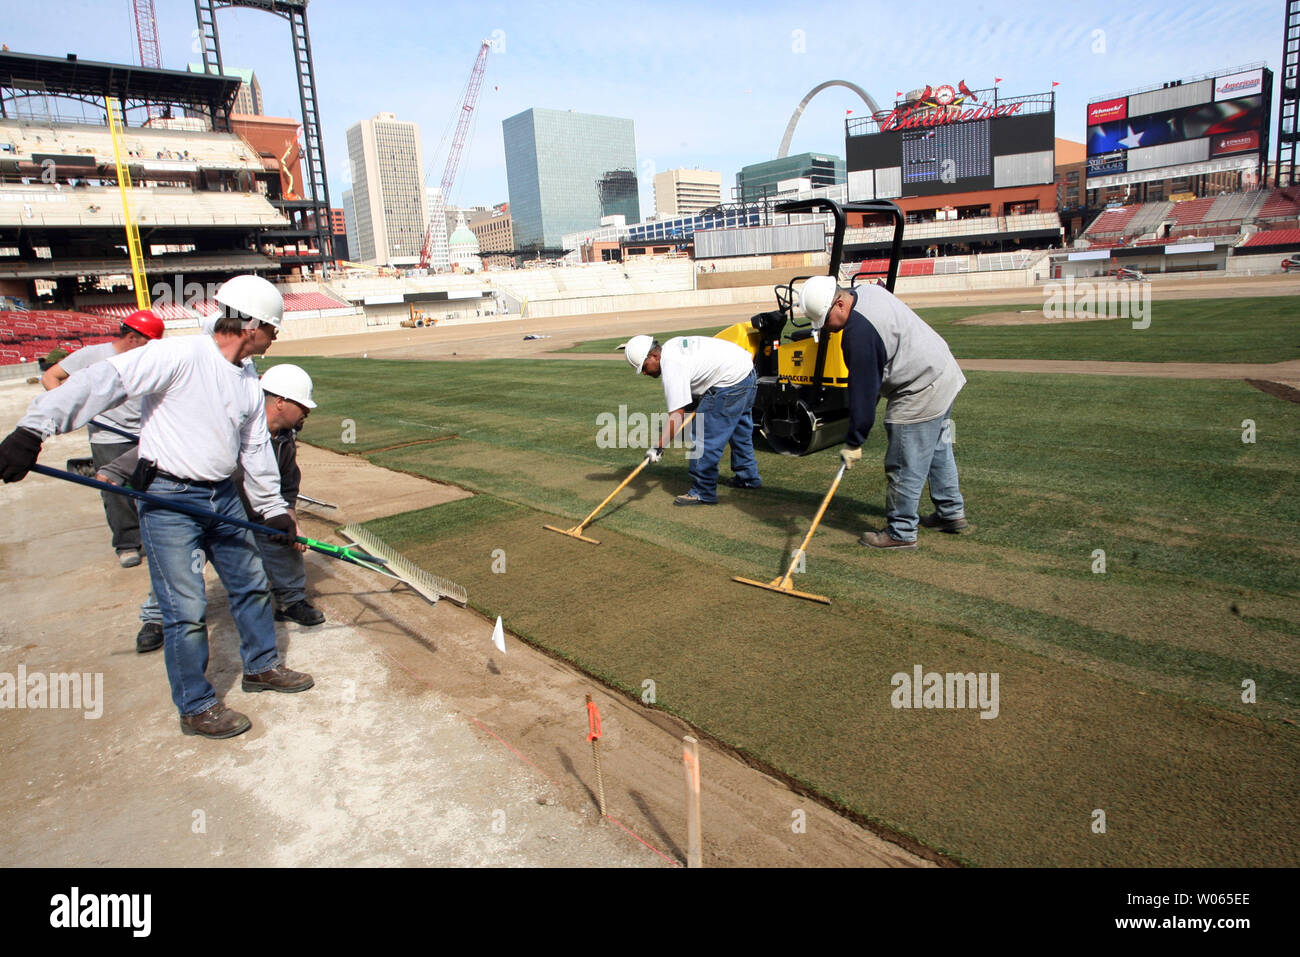 Grounds crew members position sod grass on the infield of the new Busch Stadium in St. Louis on March 15, 2006. Nearly 20 truckloads of sod from Fort Morgan, CO will cover the Busch Stadium playing surface, about 100 thosand square feet. The Cardinals will play their first game in the new facility on April 10. (UPI Photo/Bill Greenblatt) Stock Photo